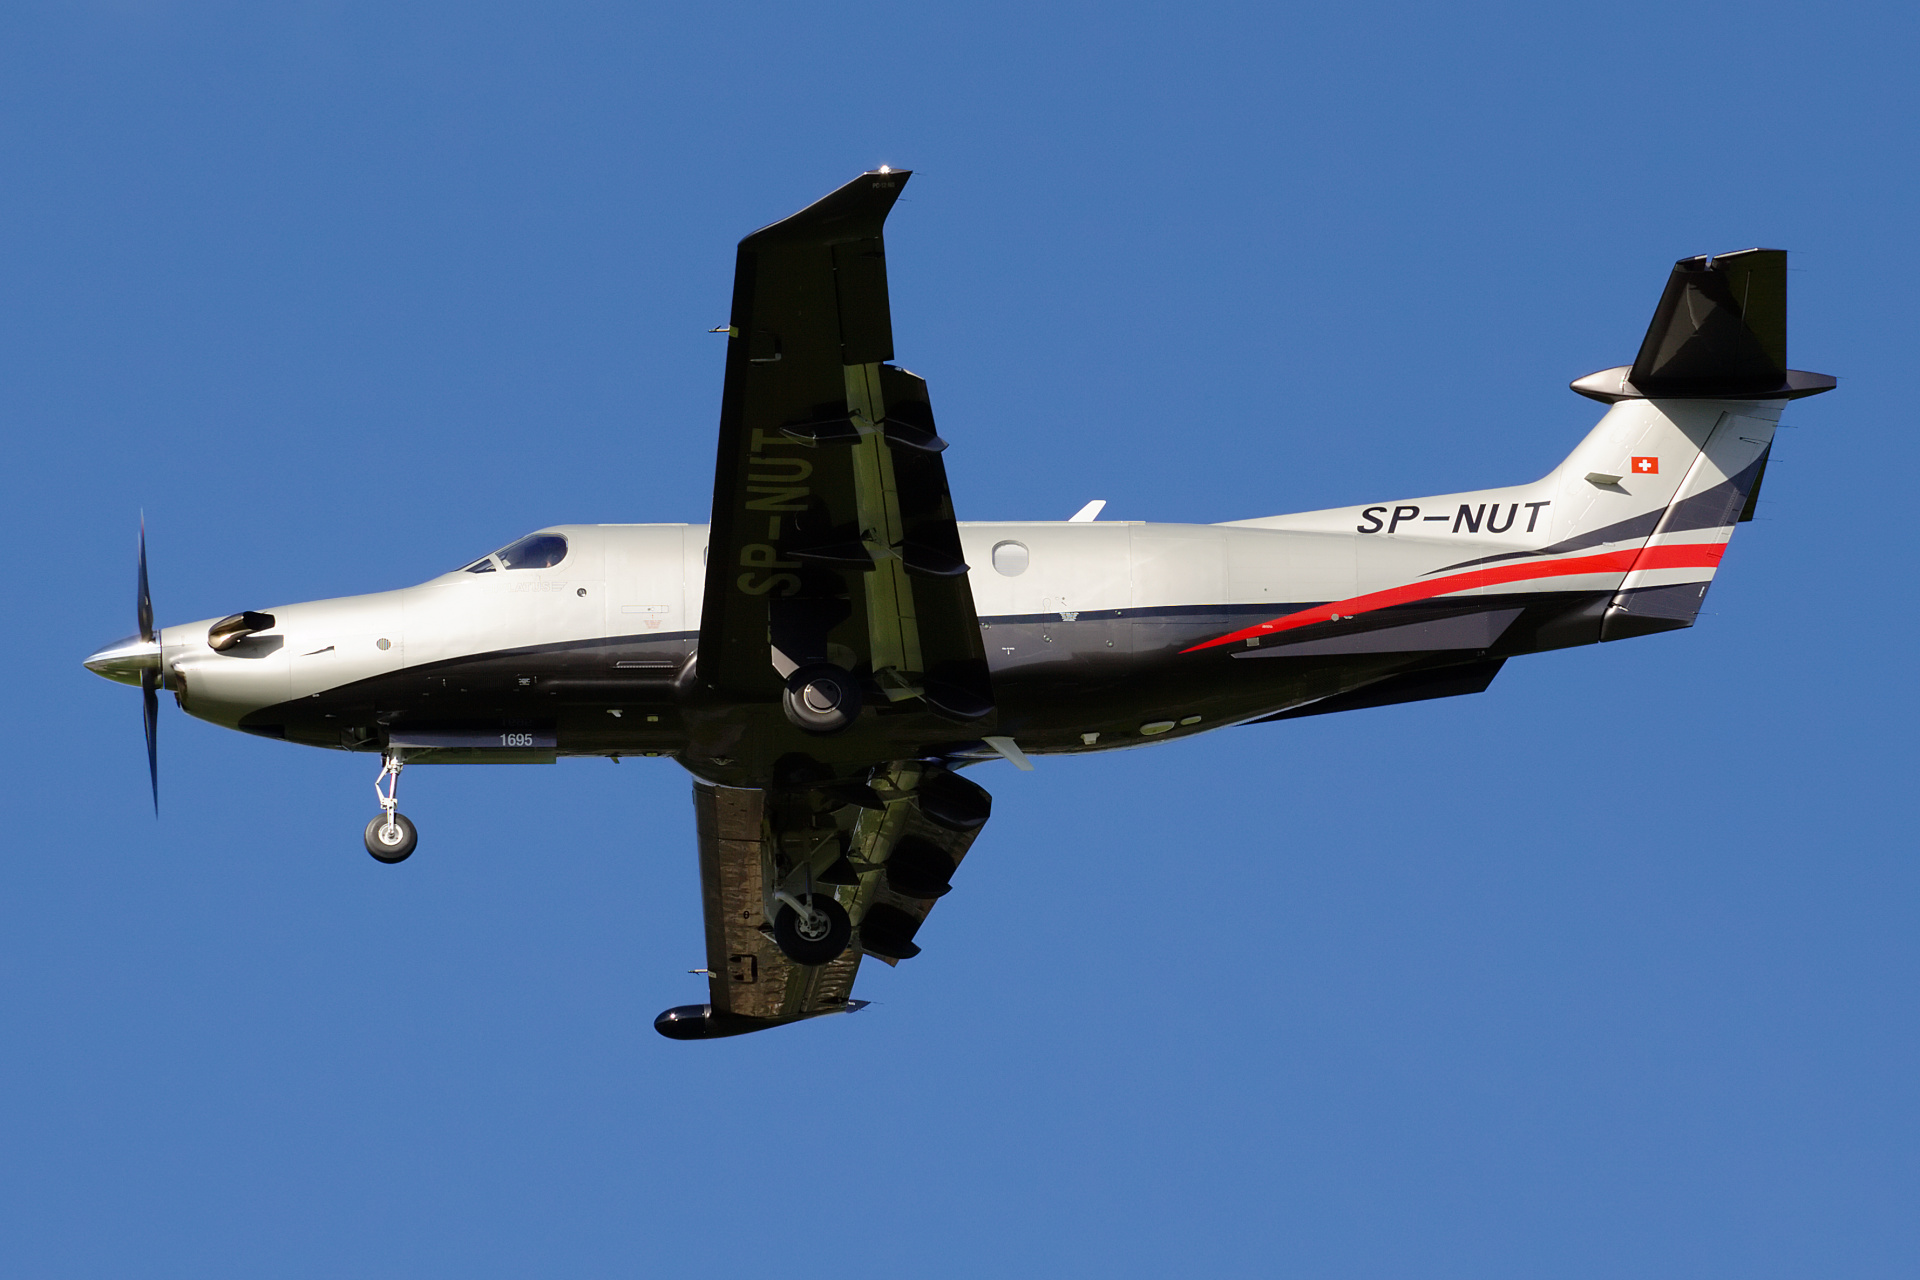 PC-12NG, SP-NUT, private (Aircraft » EPWA Spotting » Pilatus PC-12 and revisions)